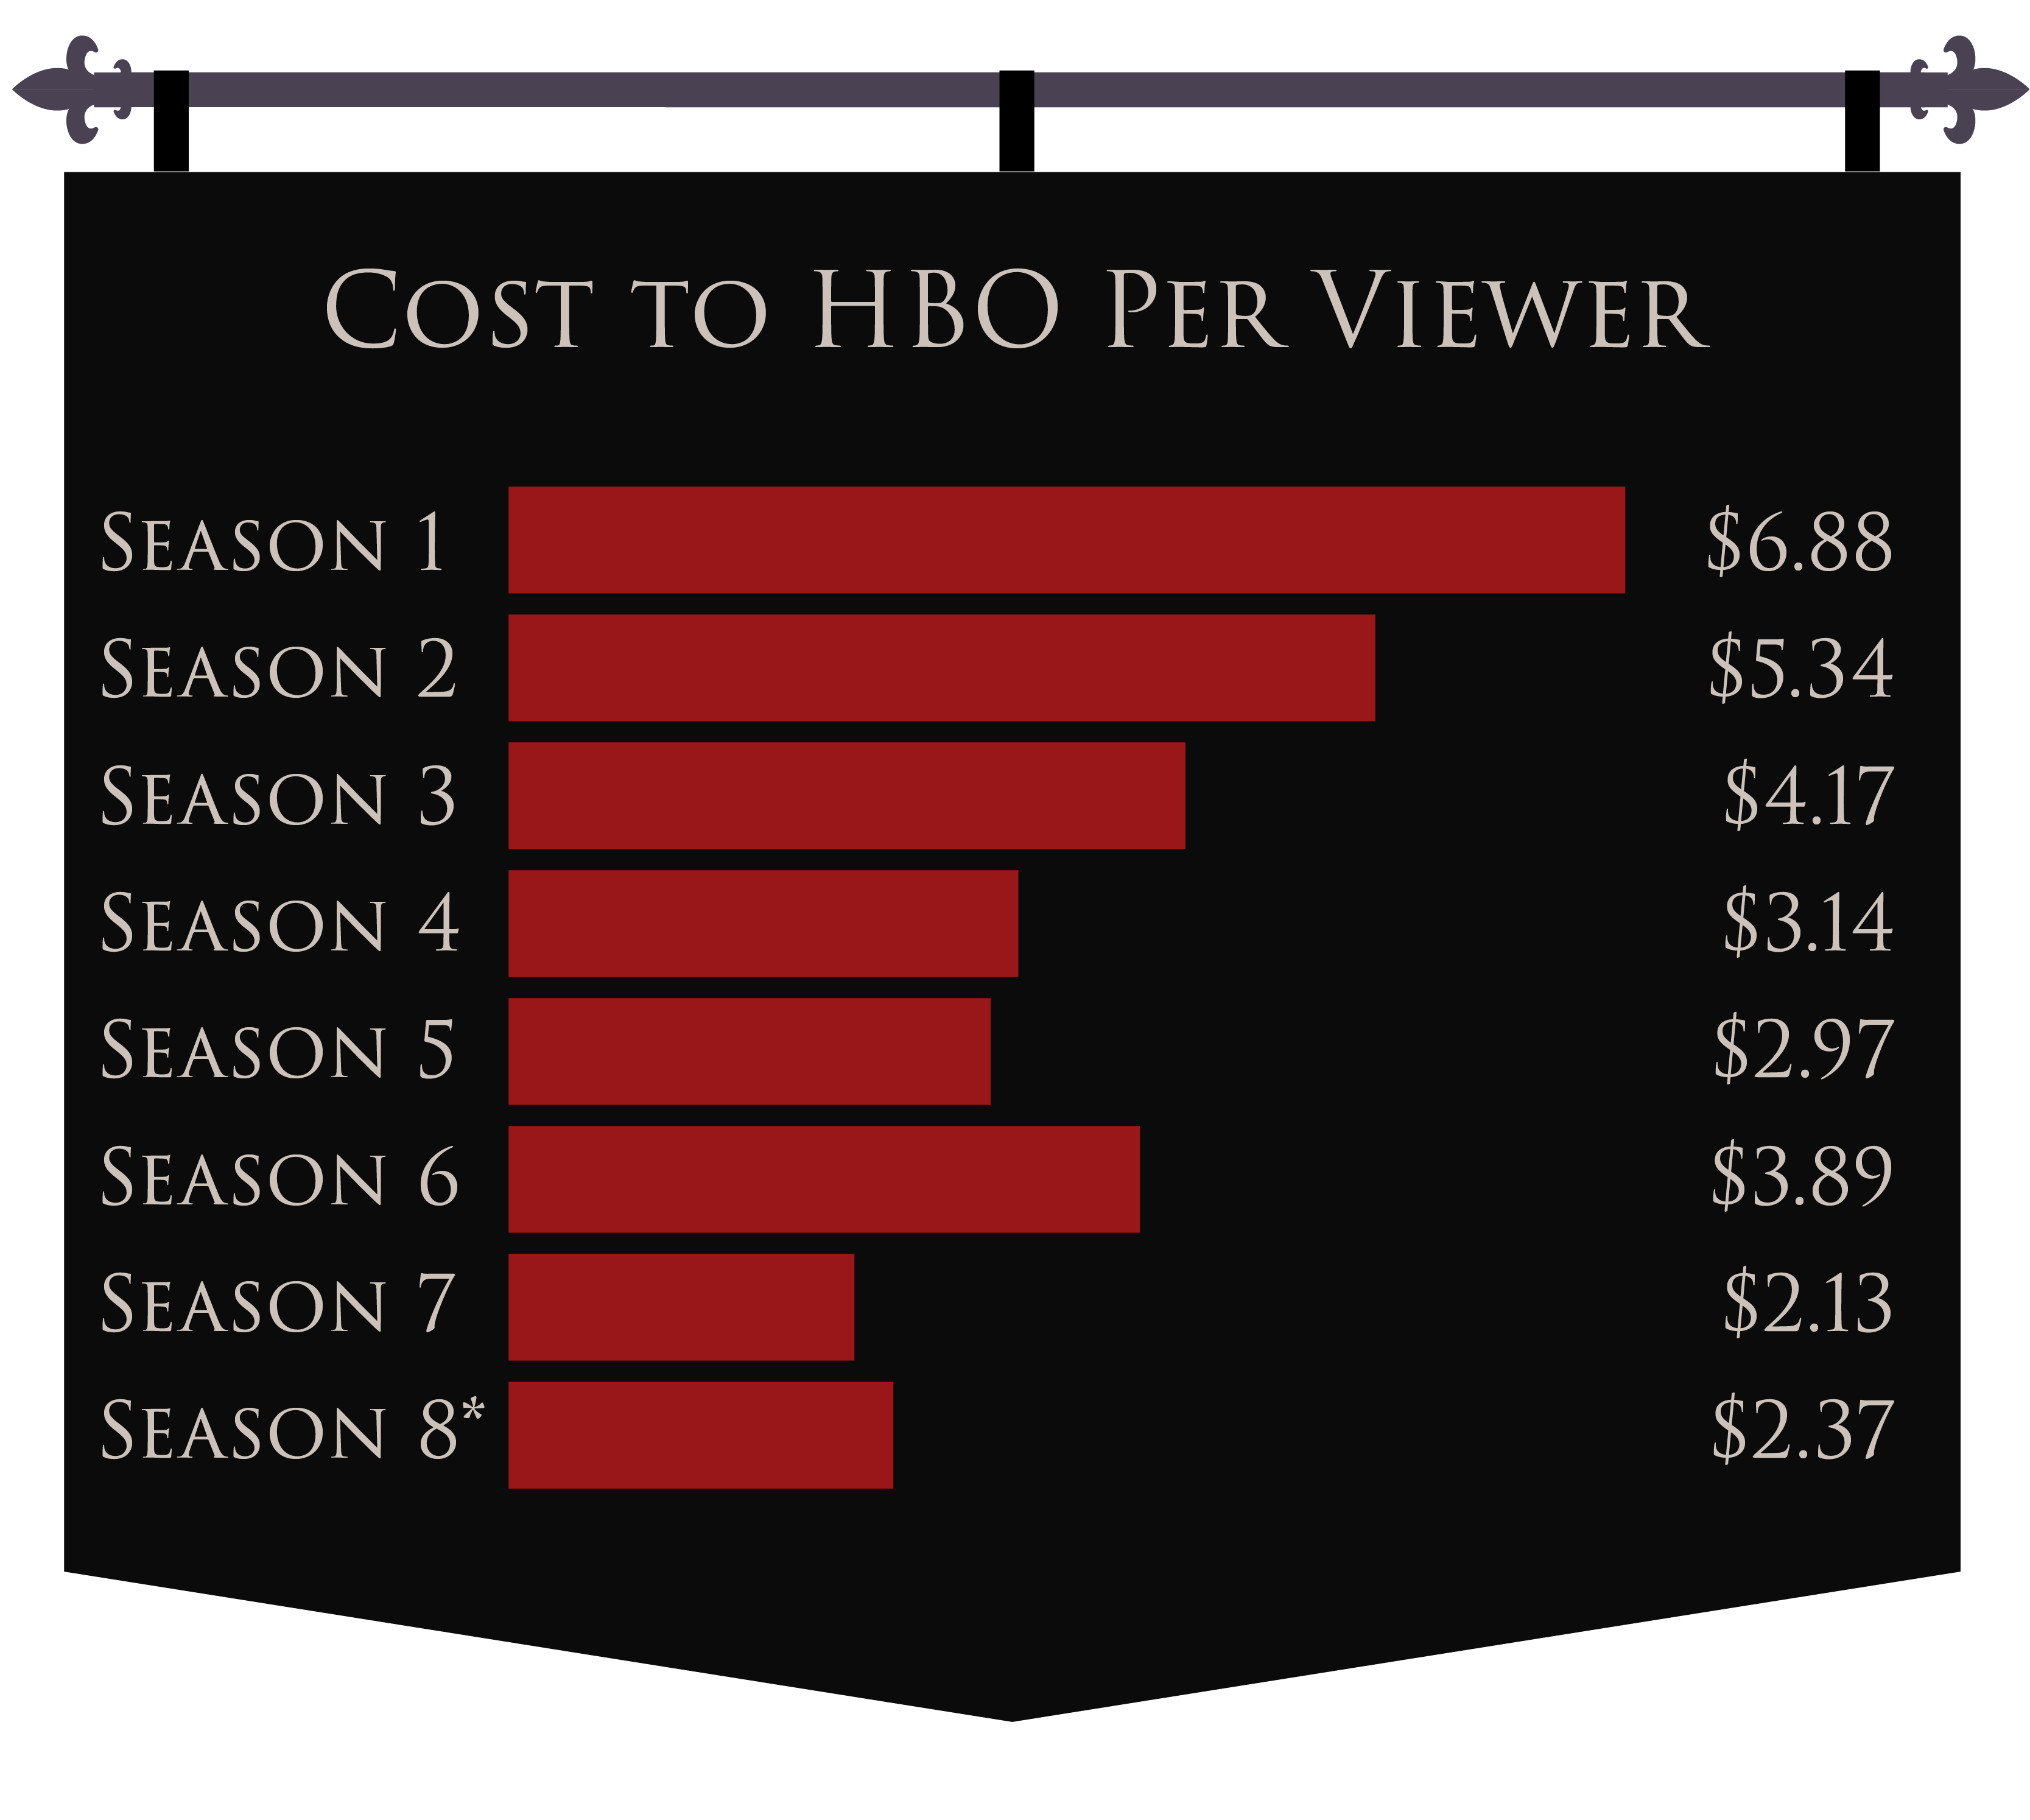 Cost to HBO Per Viewer